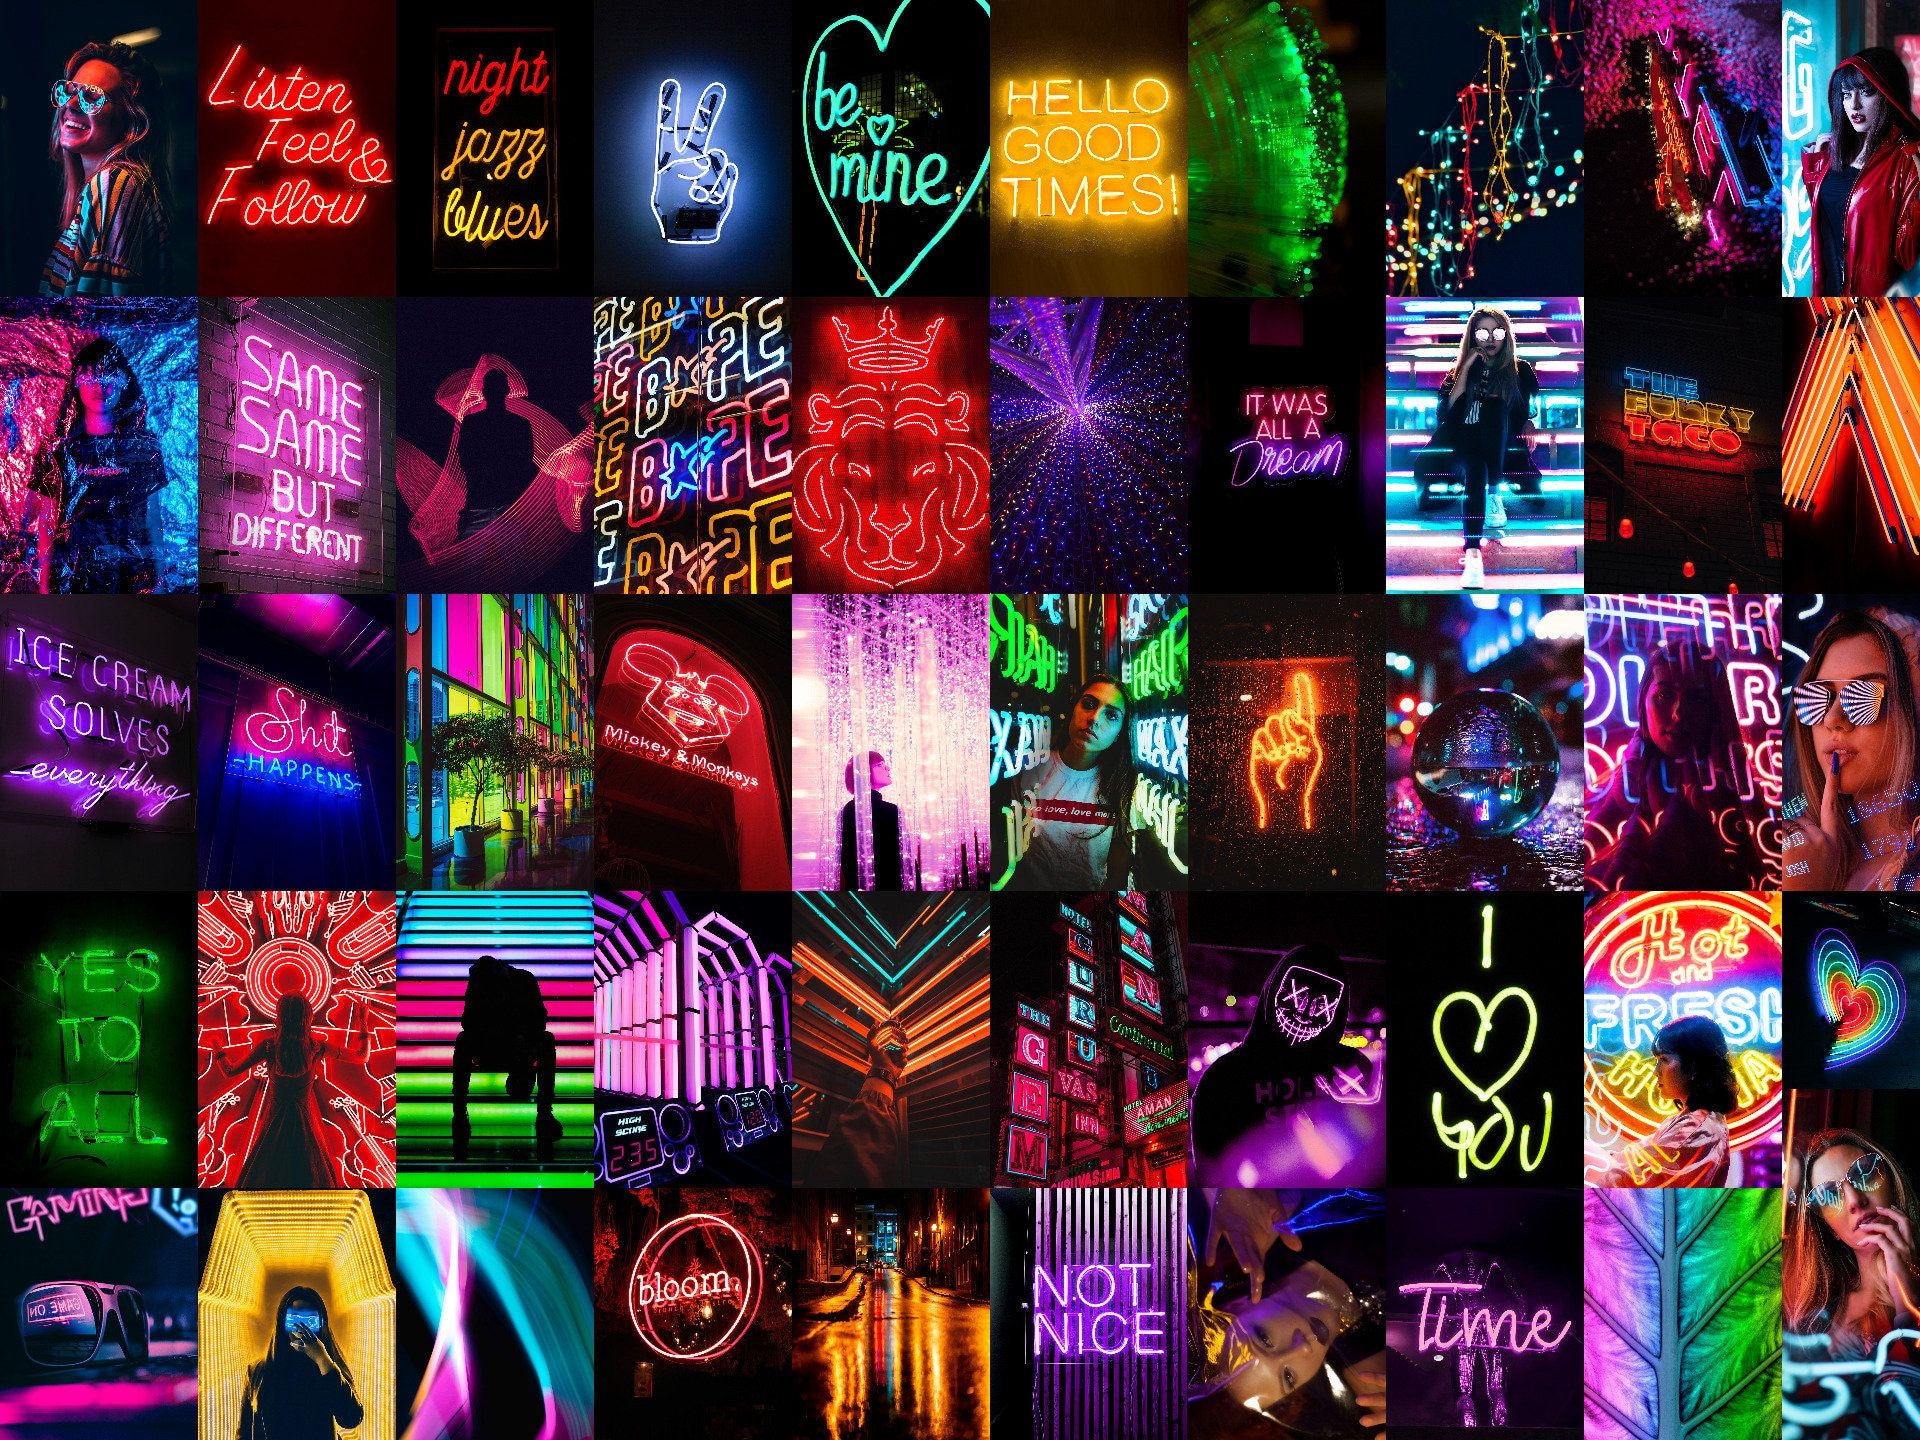 A collage of neon signs from around the world - Rainbows